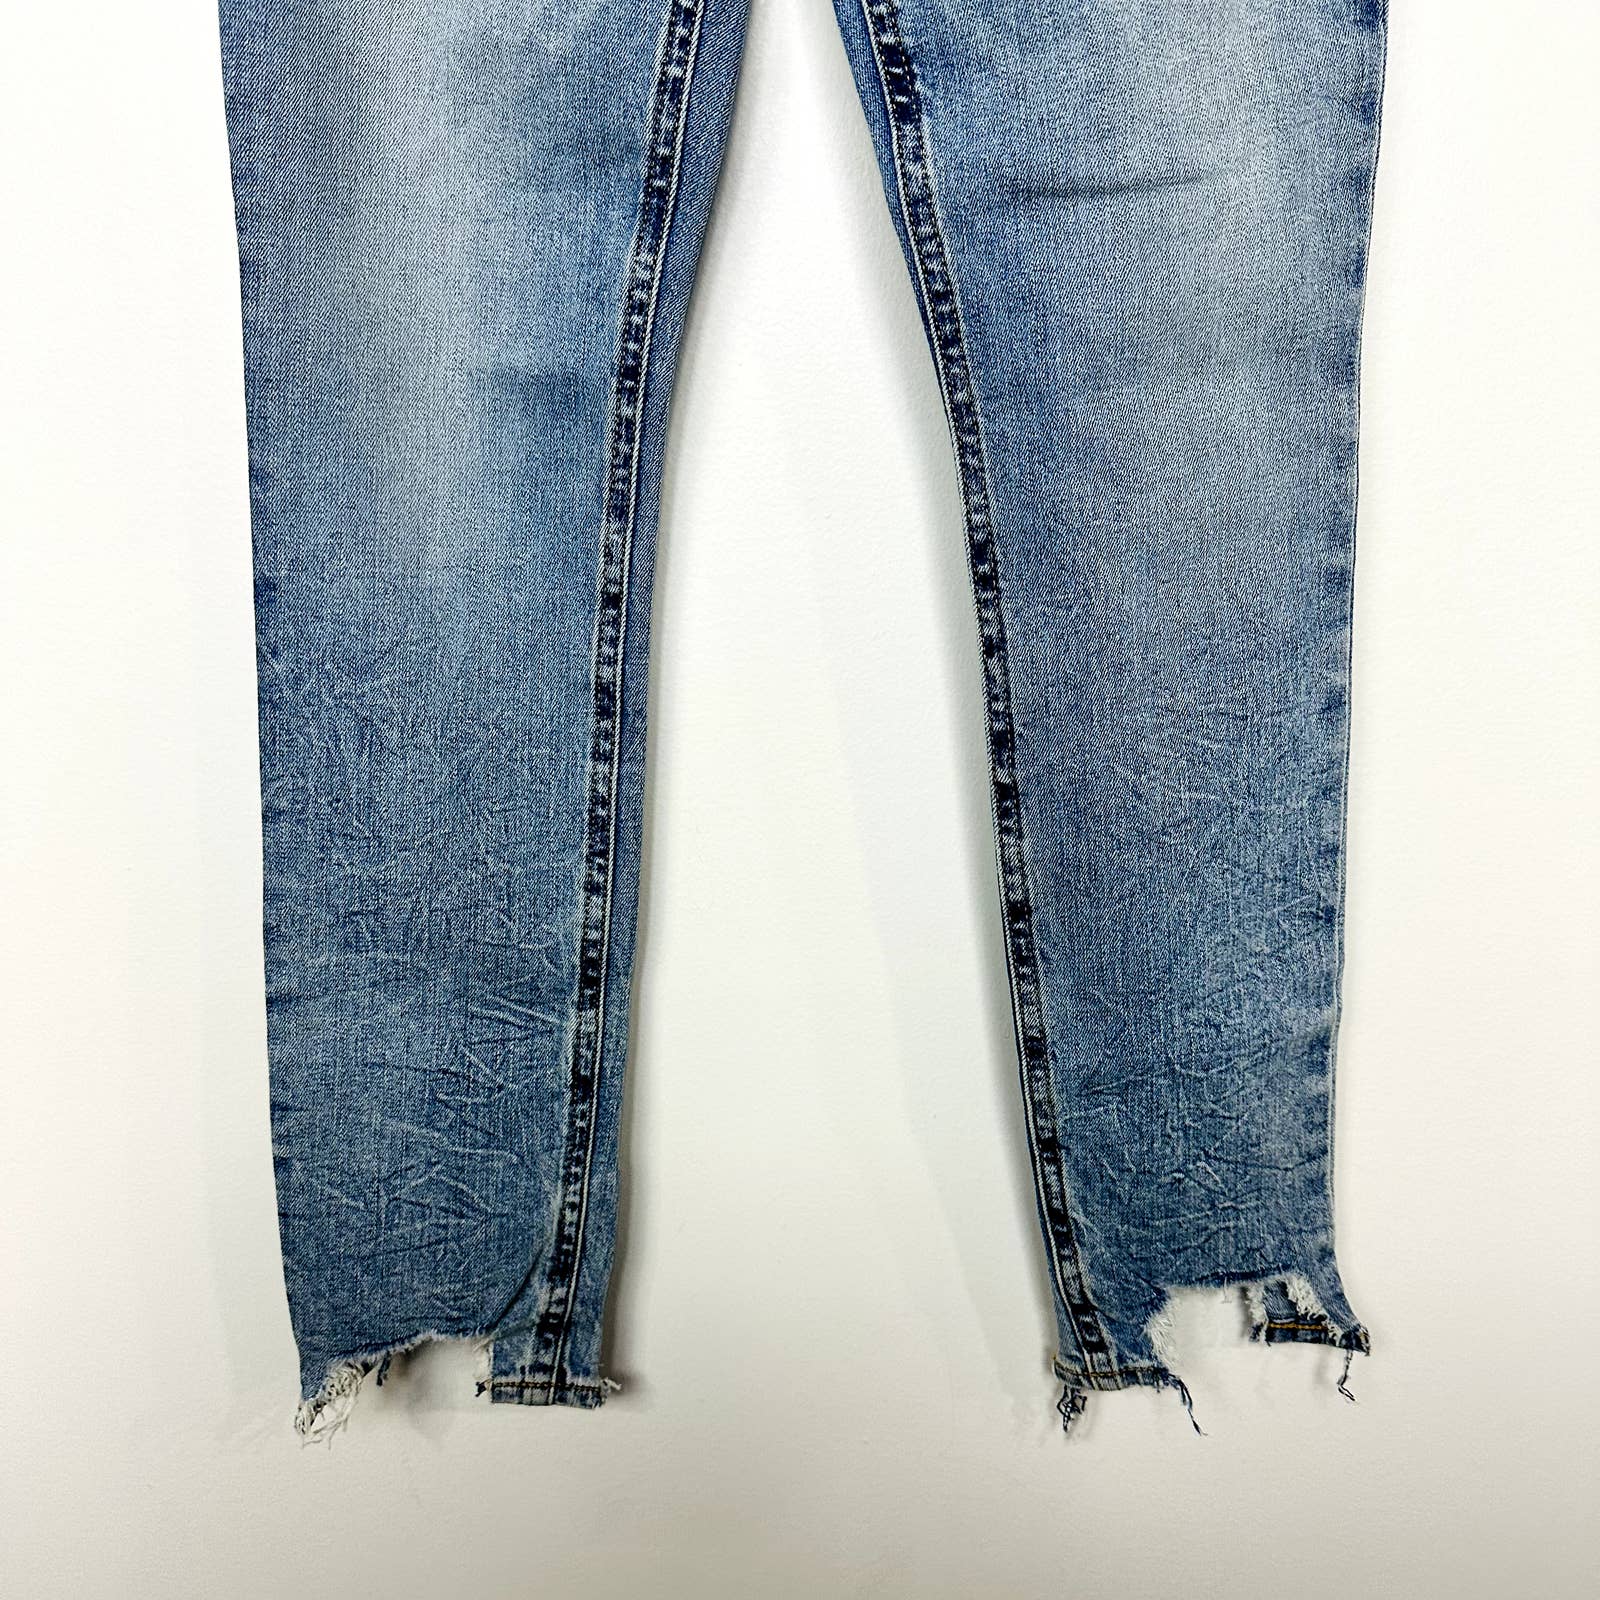 rag & bone NWT Cate Mid-Rise Distressed Ankle Skinny Jeans Thunderbird Size 23